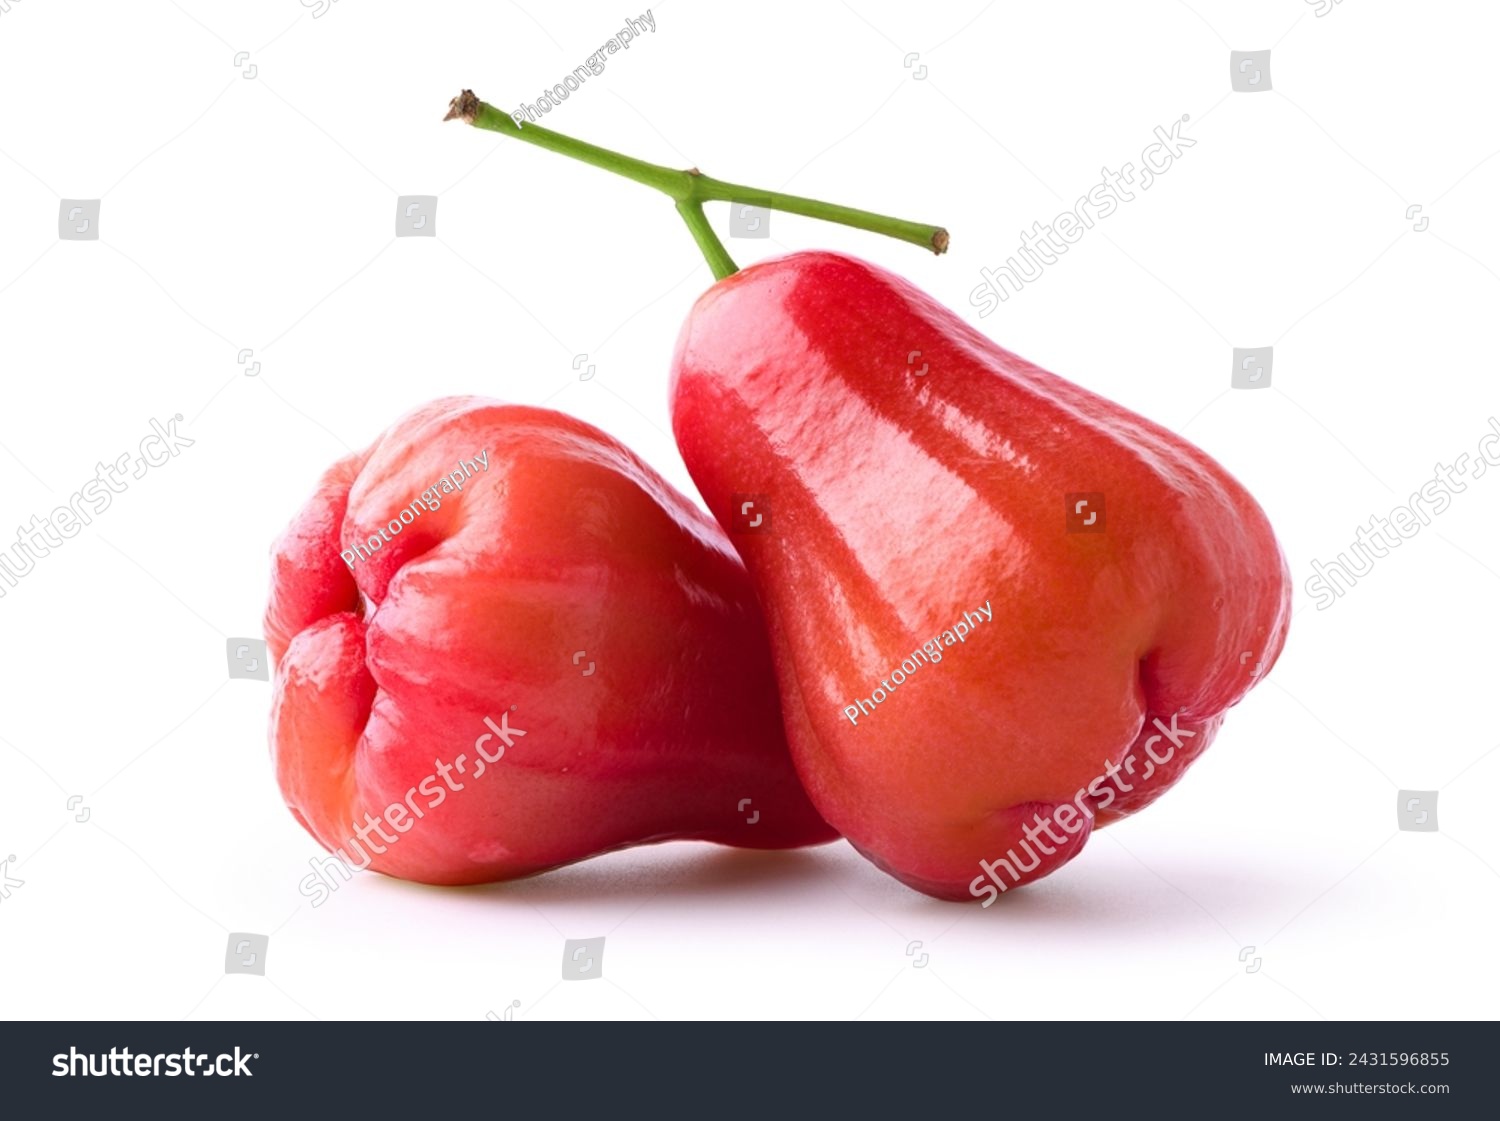 Juicy red rose apples isolated on white background. Clipping path. #2431596855